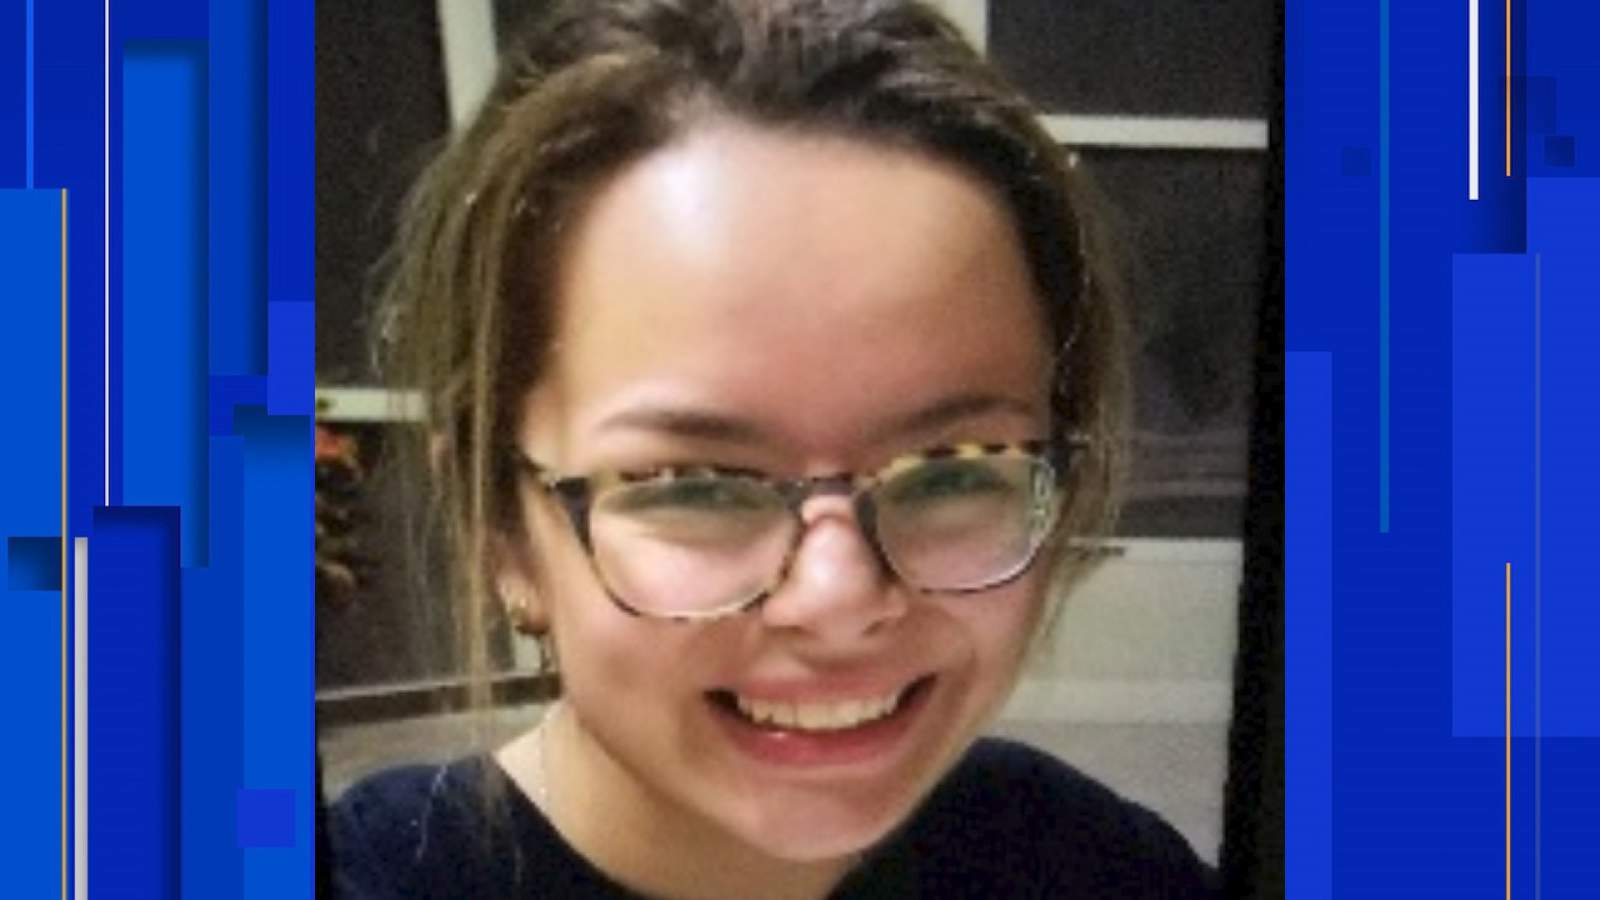 AMBER Alert for missing 17-year-old from San Juan discontinued